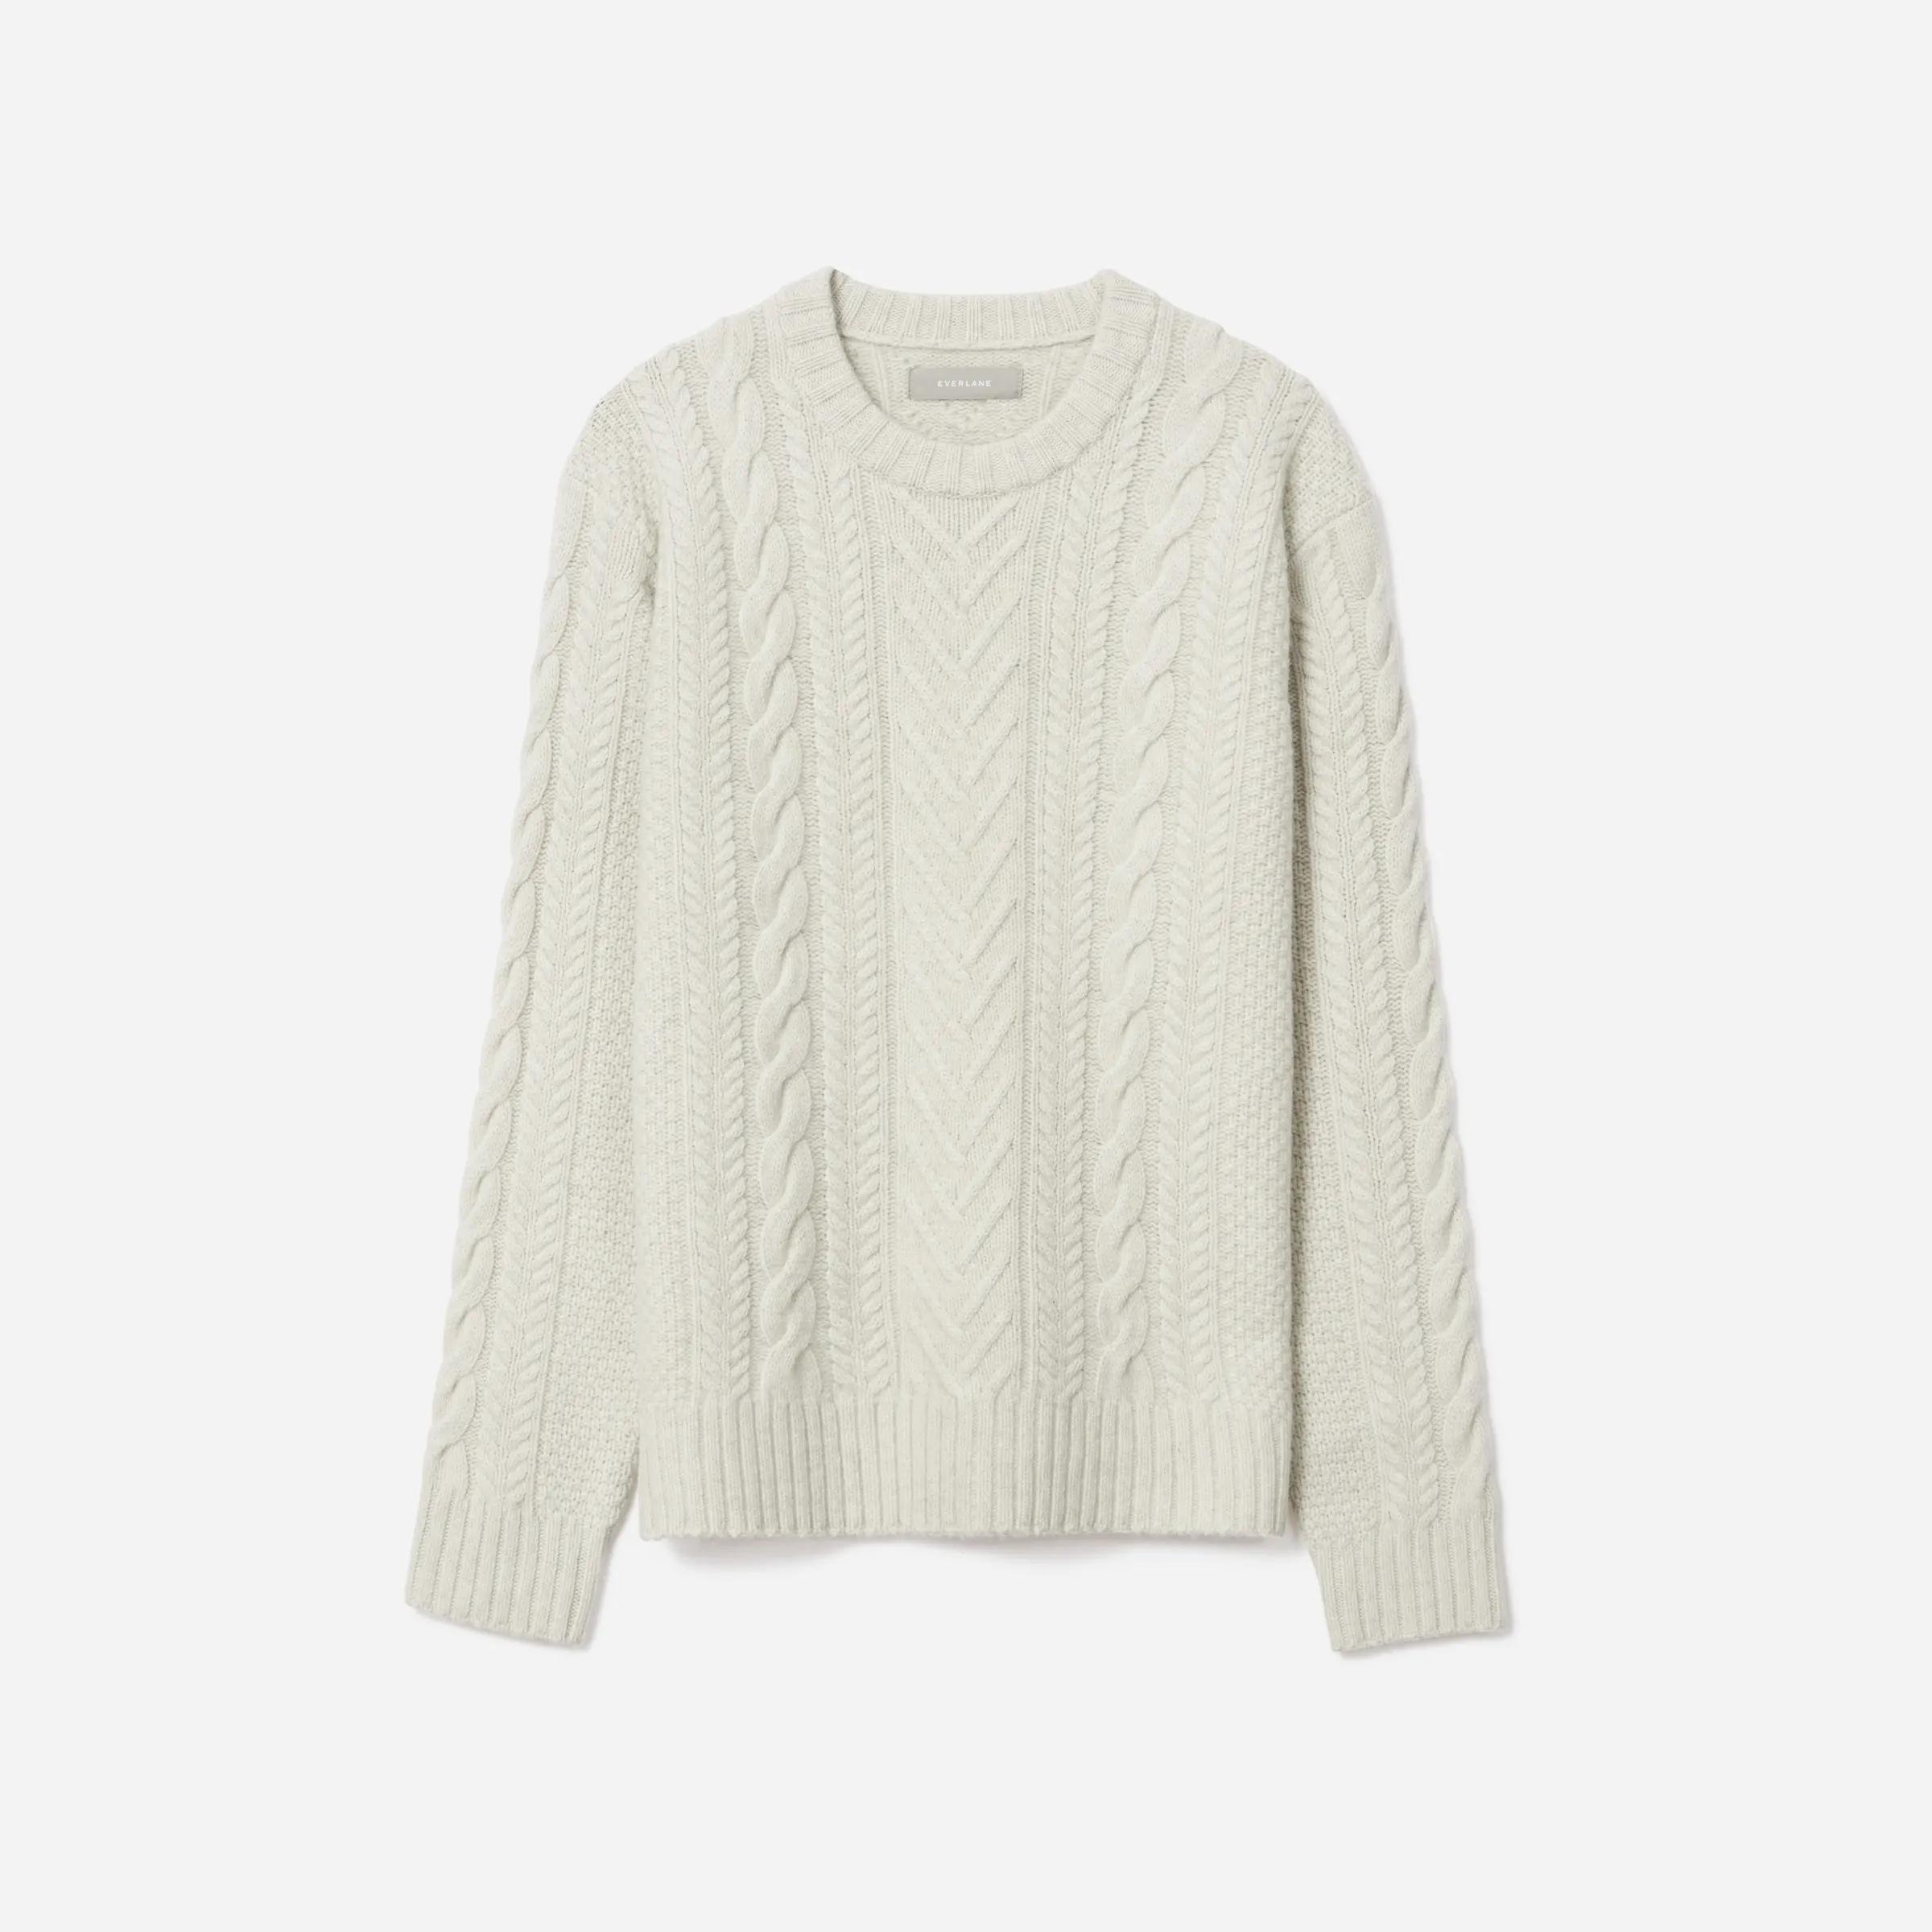 The Felted Merino Cable-Knit Crew by EVERLANE